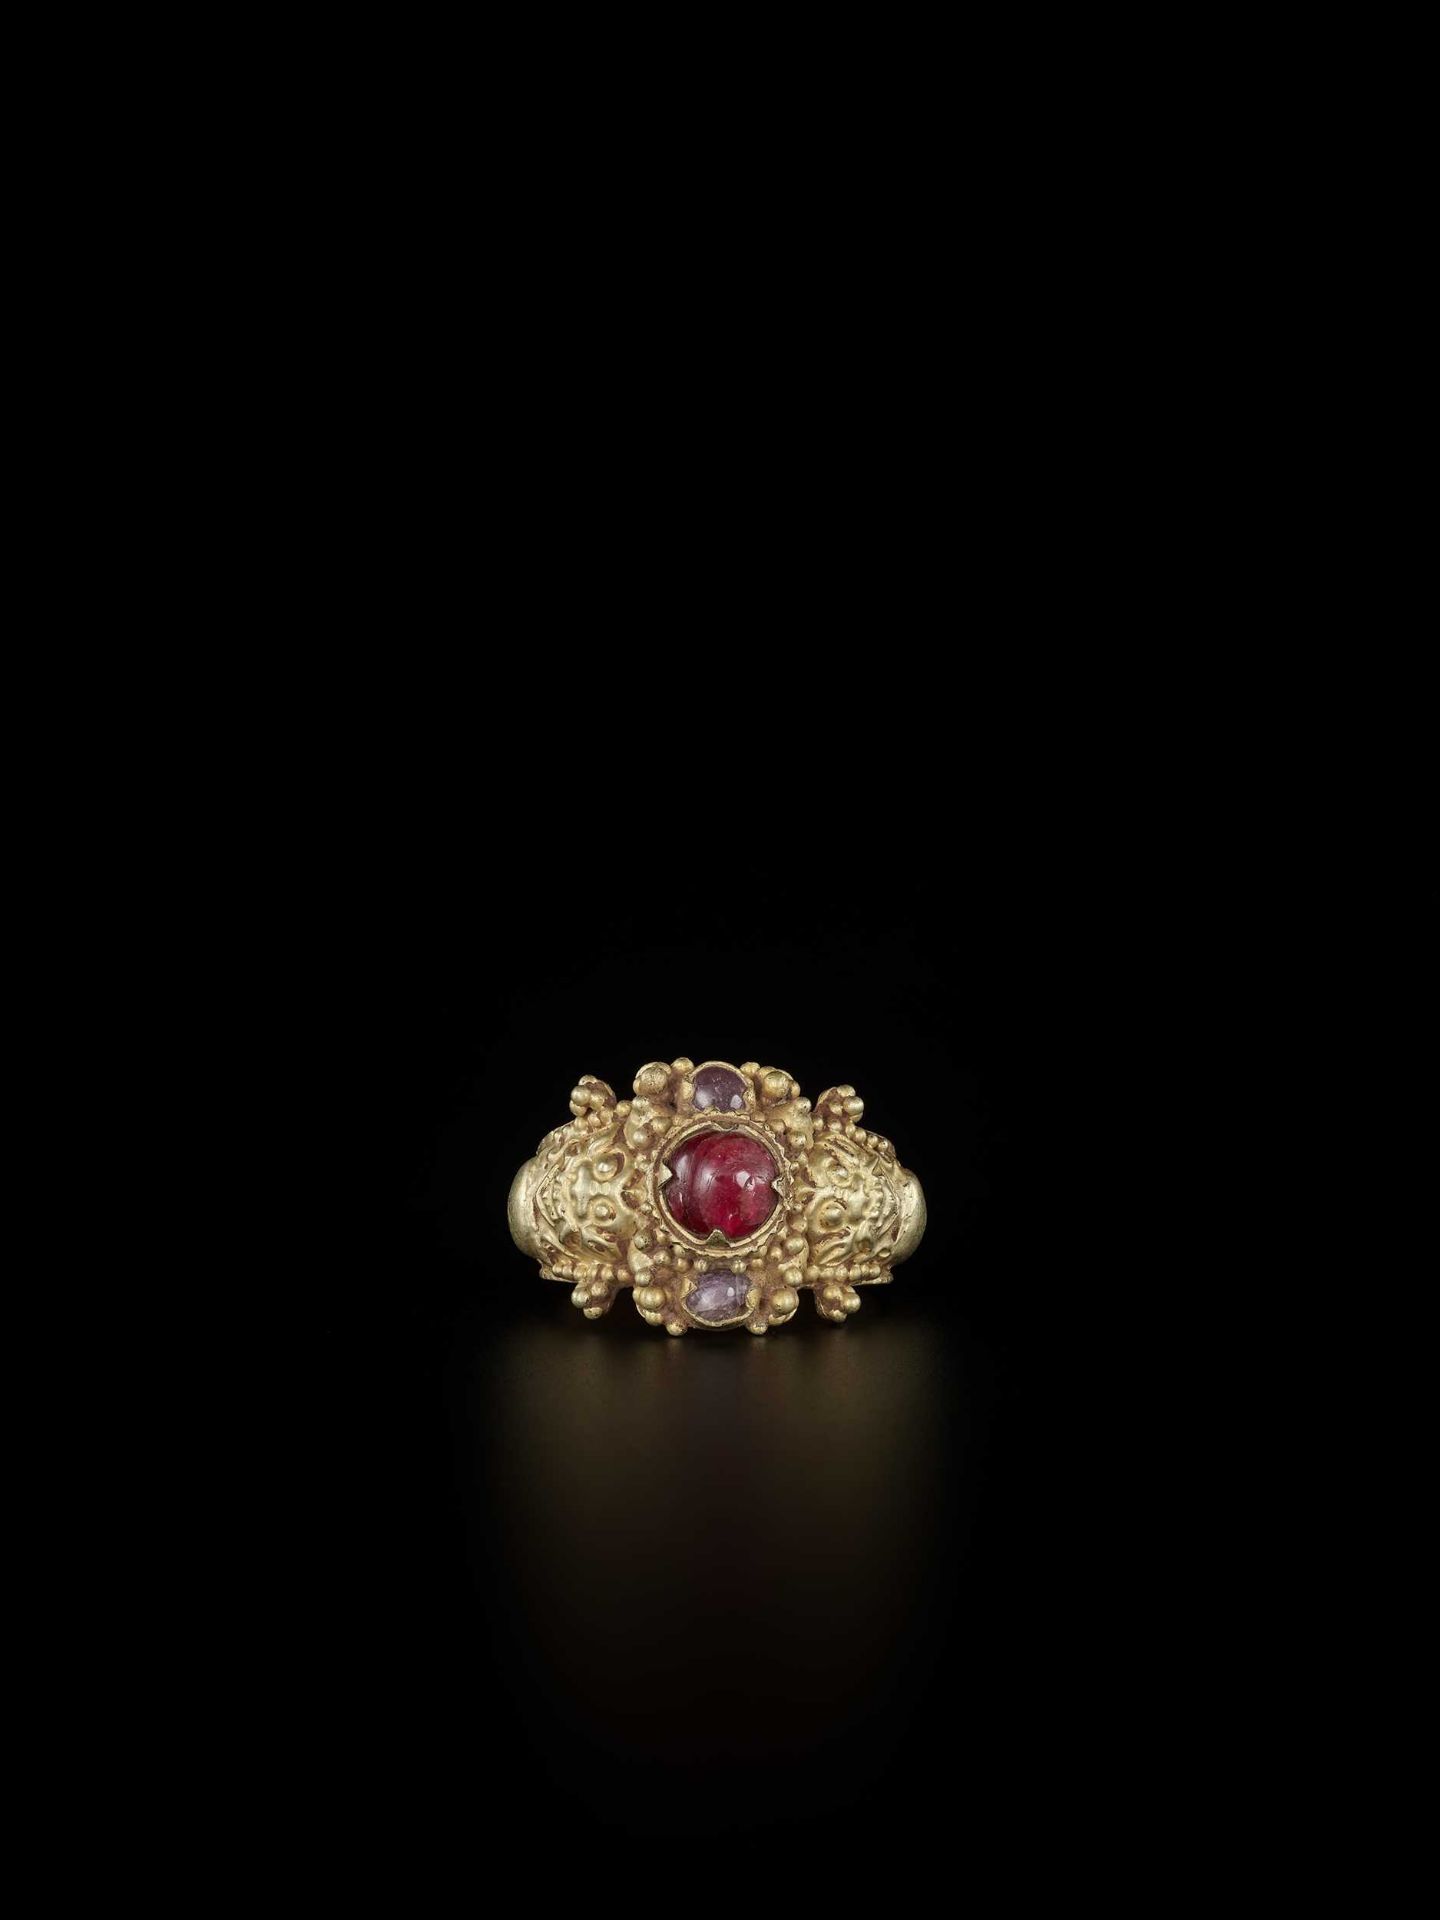 A CHAM RUBY AND AMETHYST-SET GOLD REPOUSSÉ RING WITH KALA MASKS